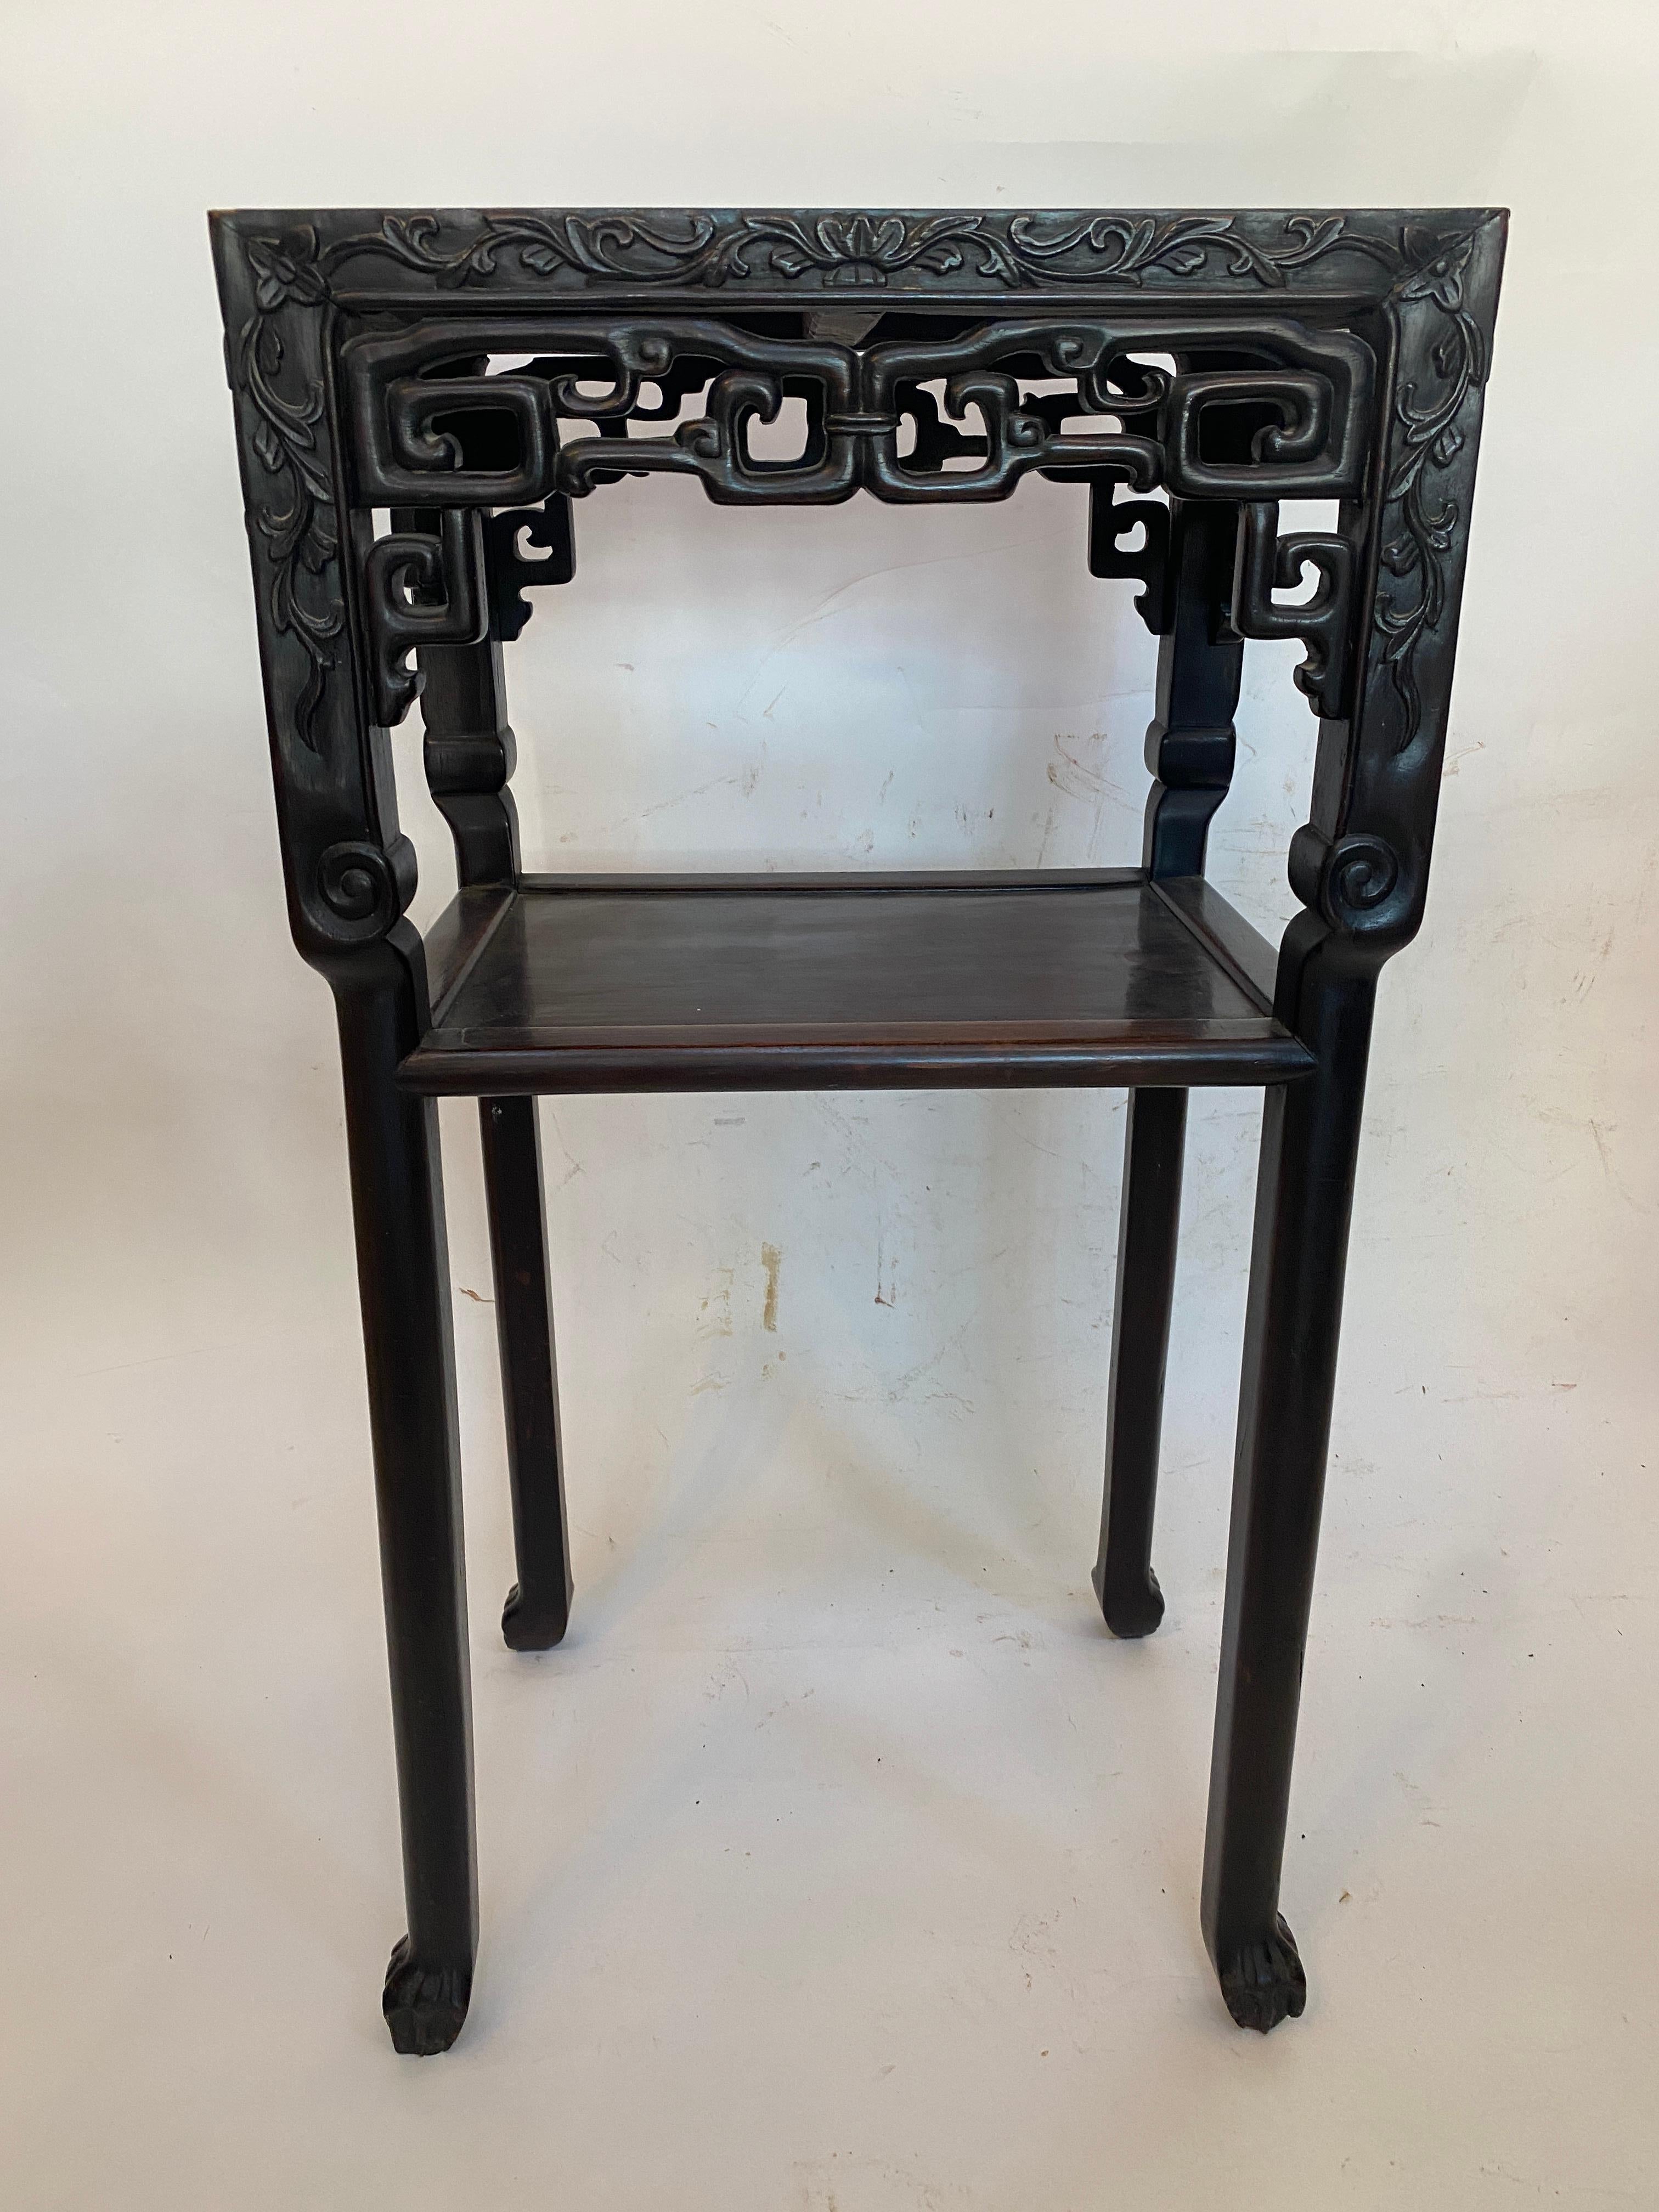 A 19th century antique Chinese carved rosewood two tiered flower stand table with rouge griotte marble top insert, the inset marble top over carved hardwood apron 4 legs, carved with fretwork sides rising on claw feet see more pictures, measures: